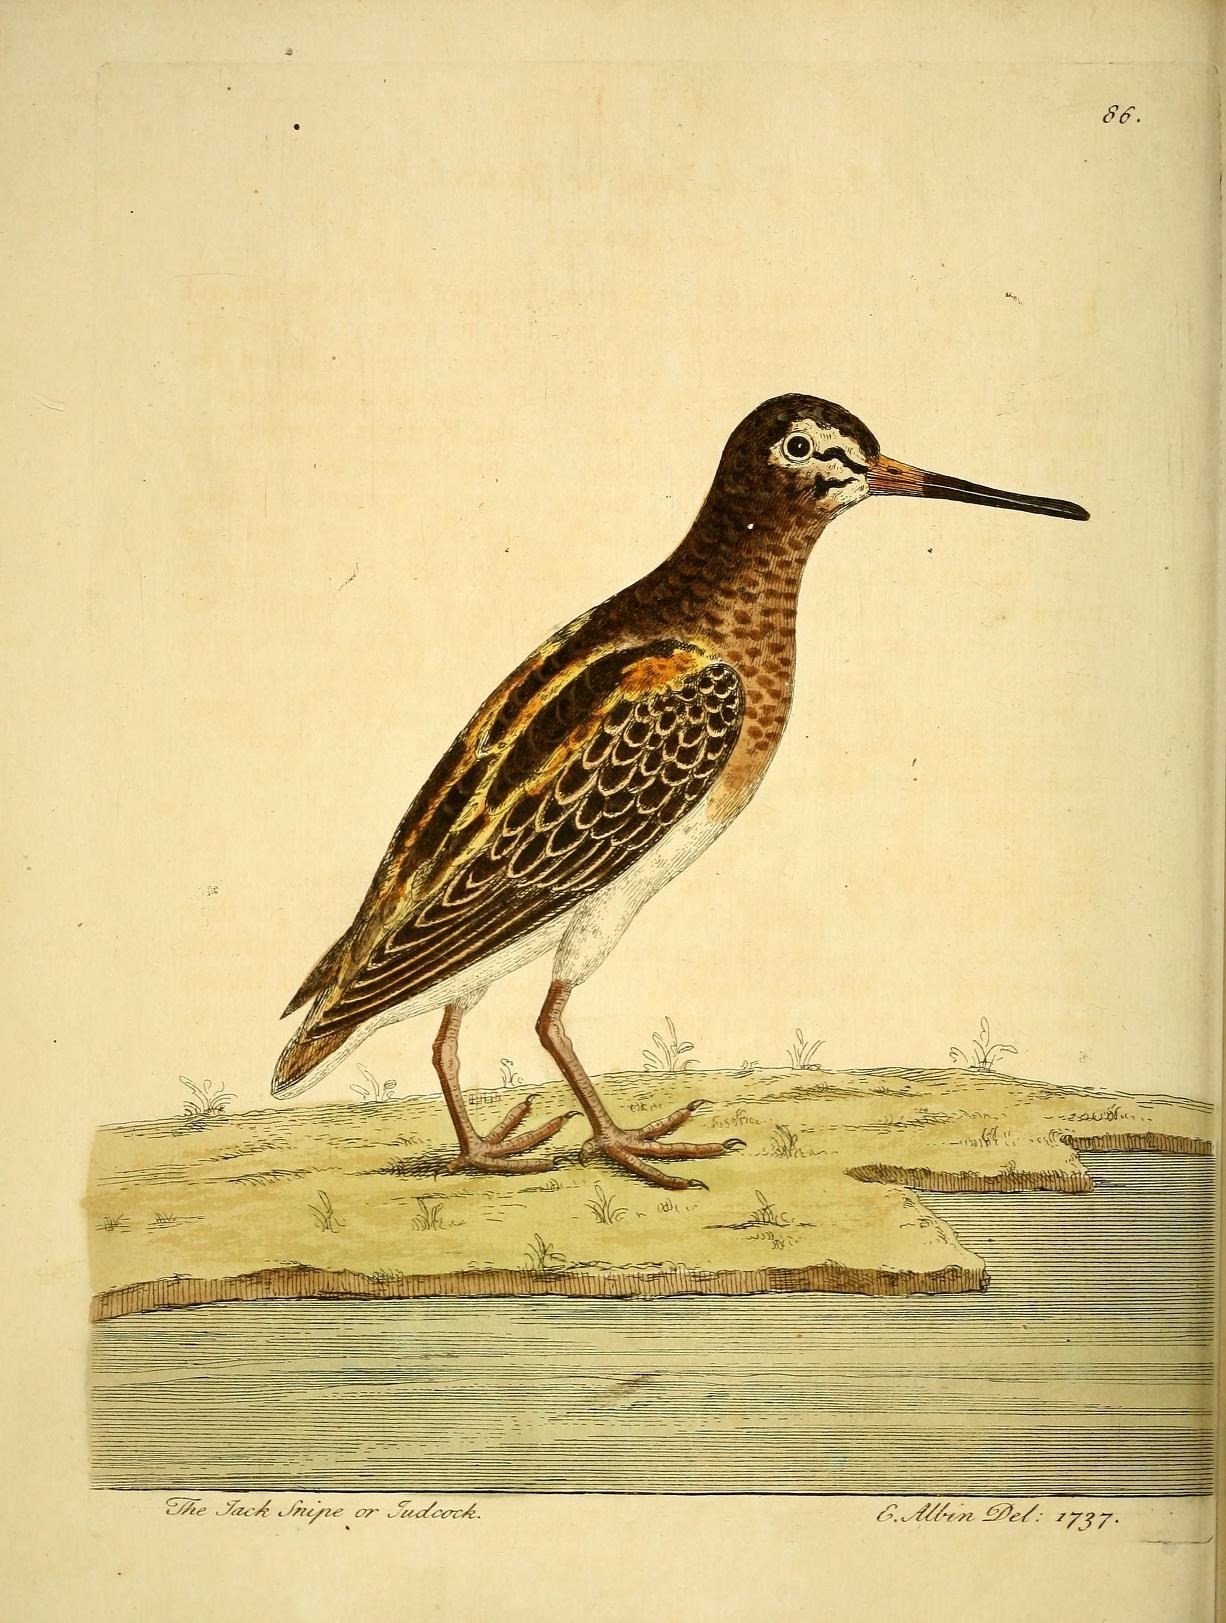 a bird standing on the ground near a body of water